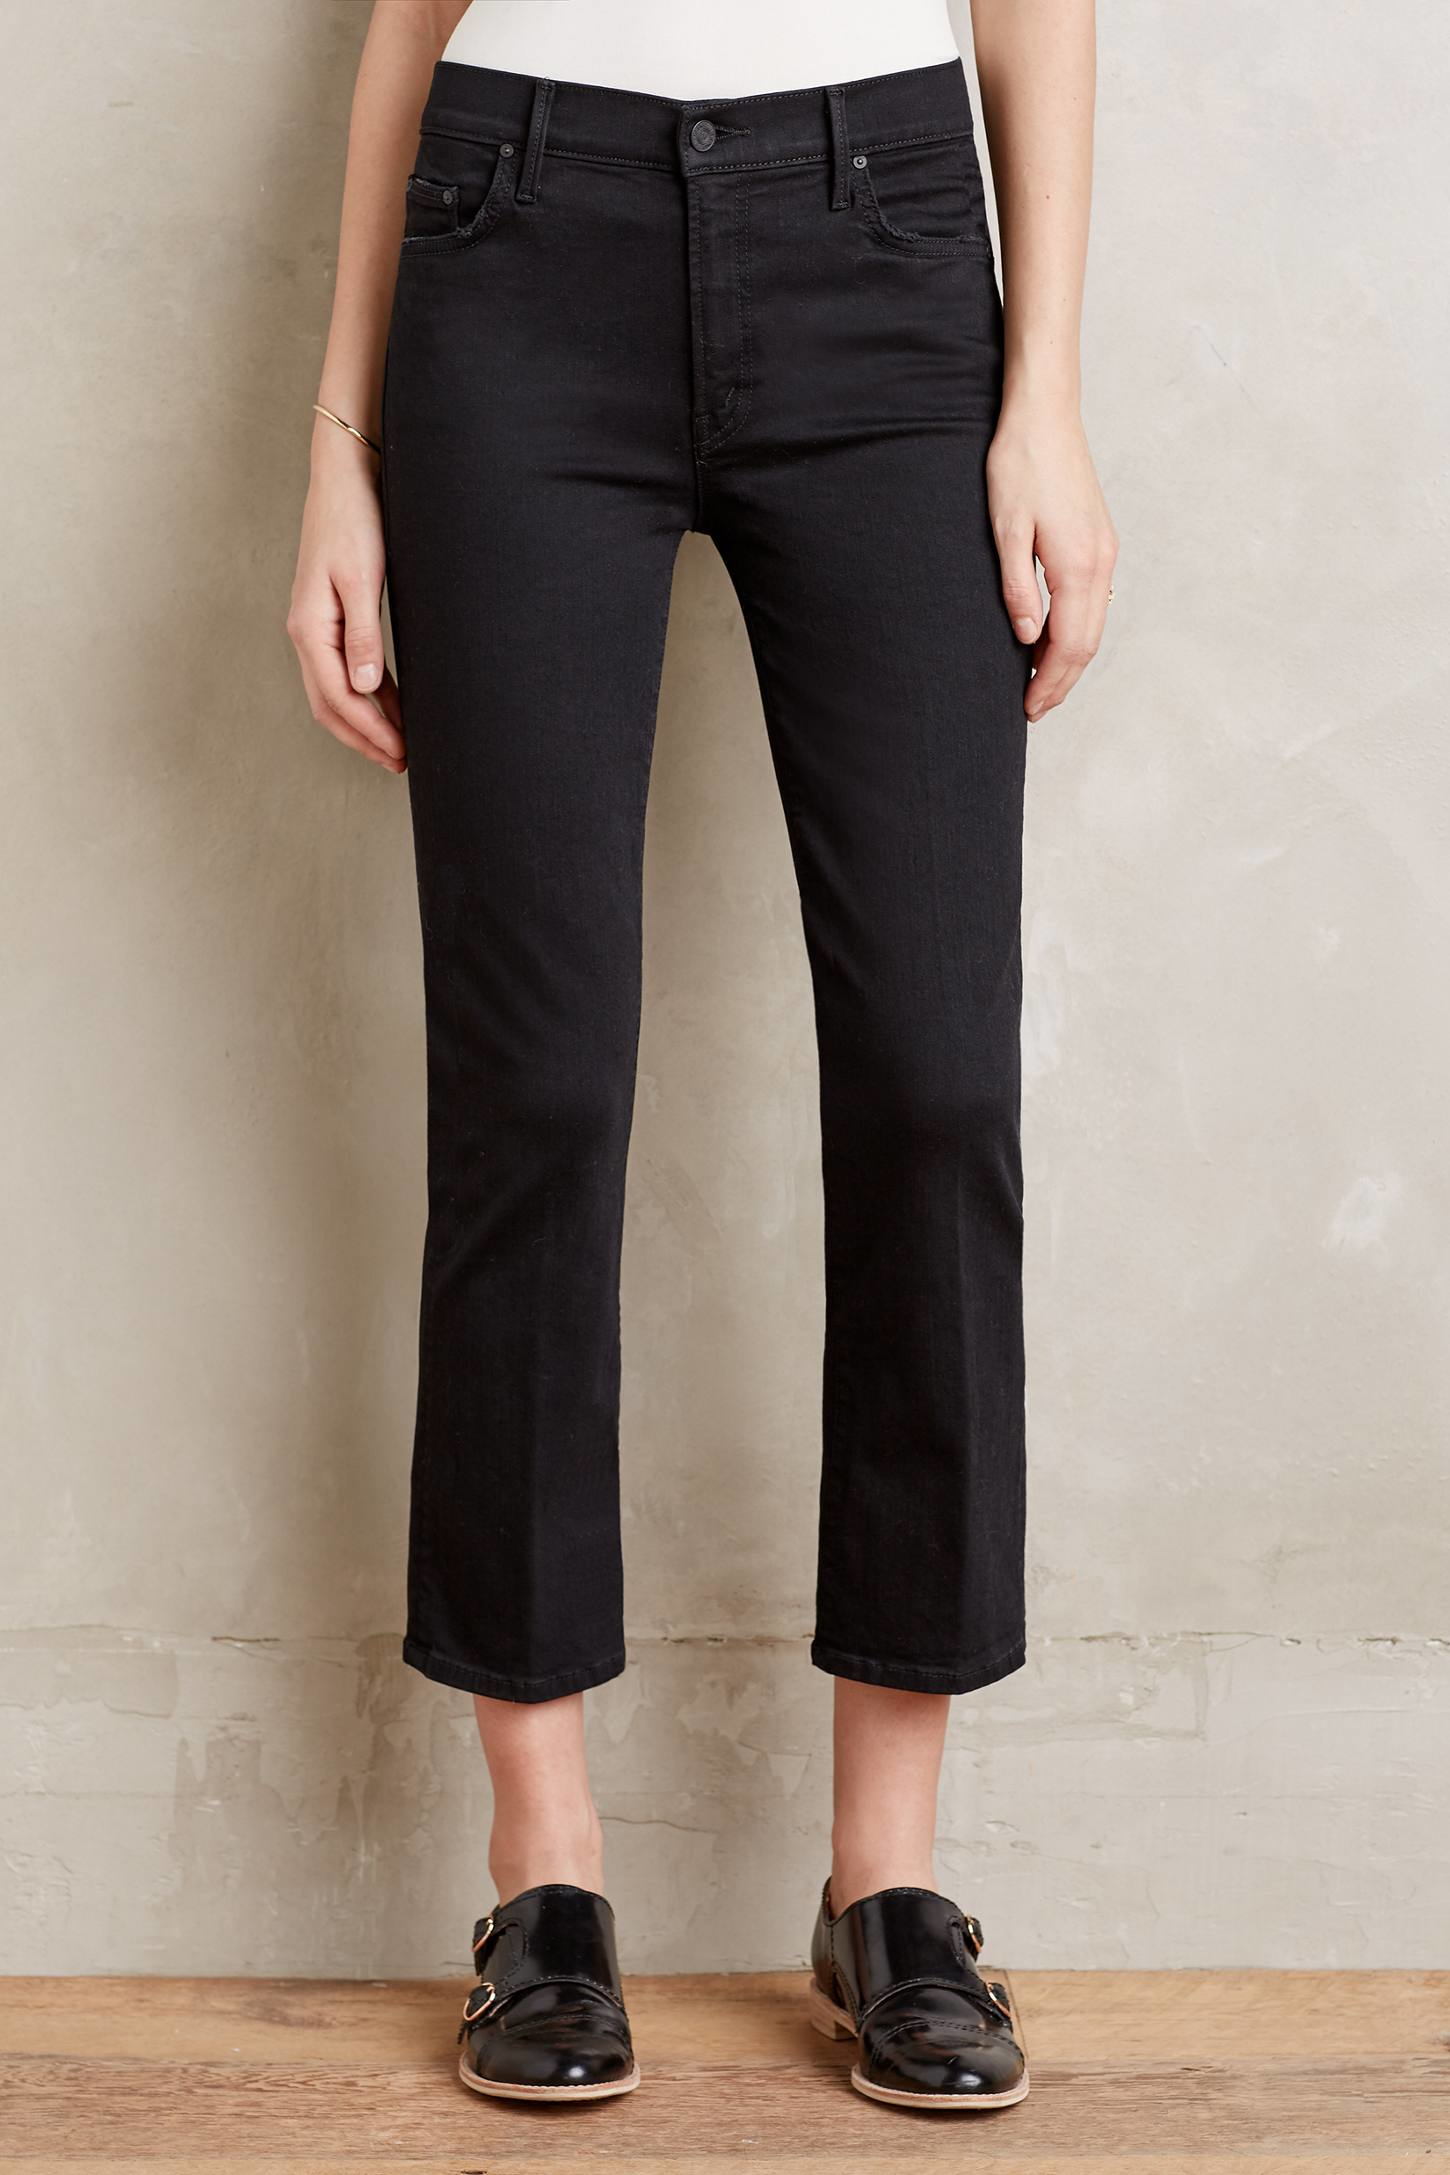 Lyst - Mother Insider Crop Jeans in Blue